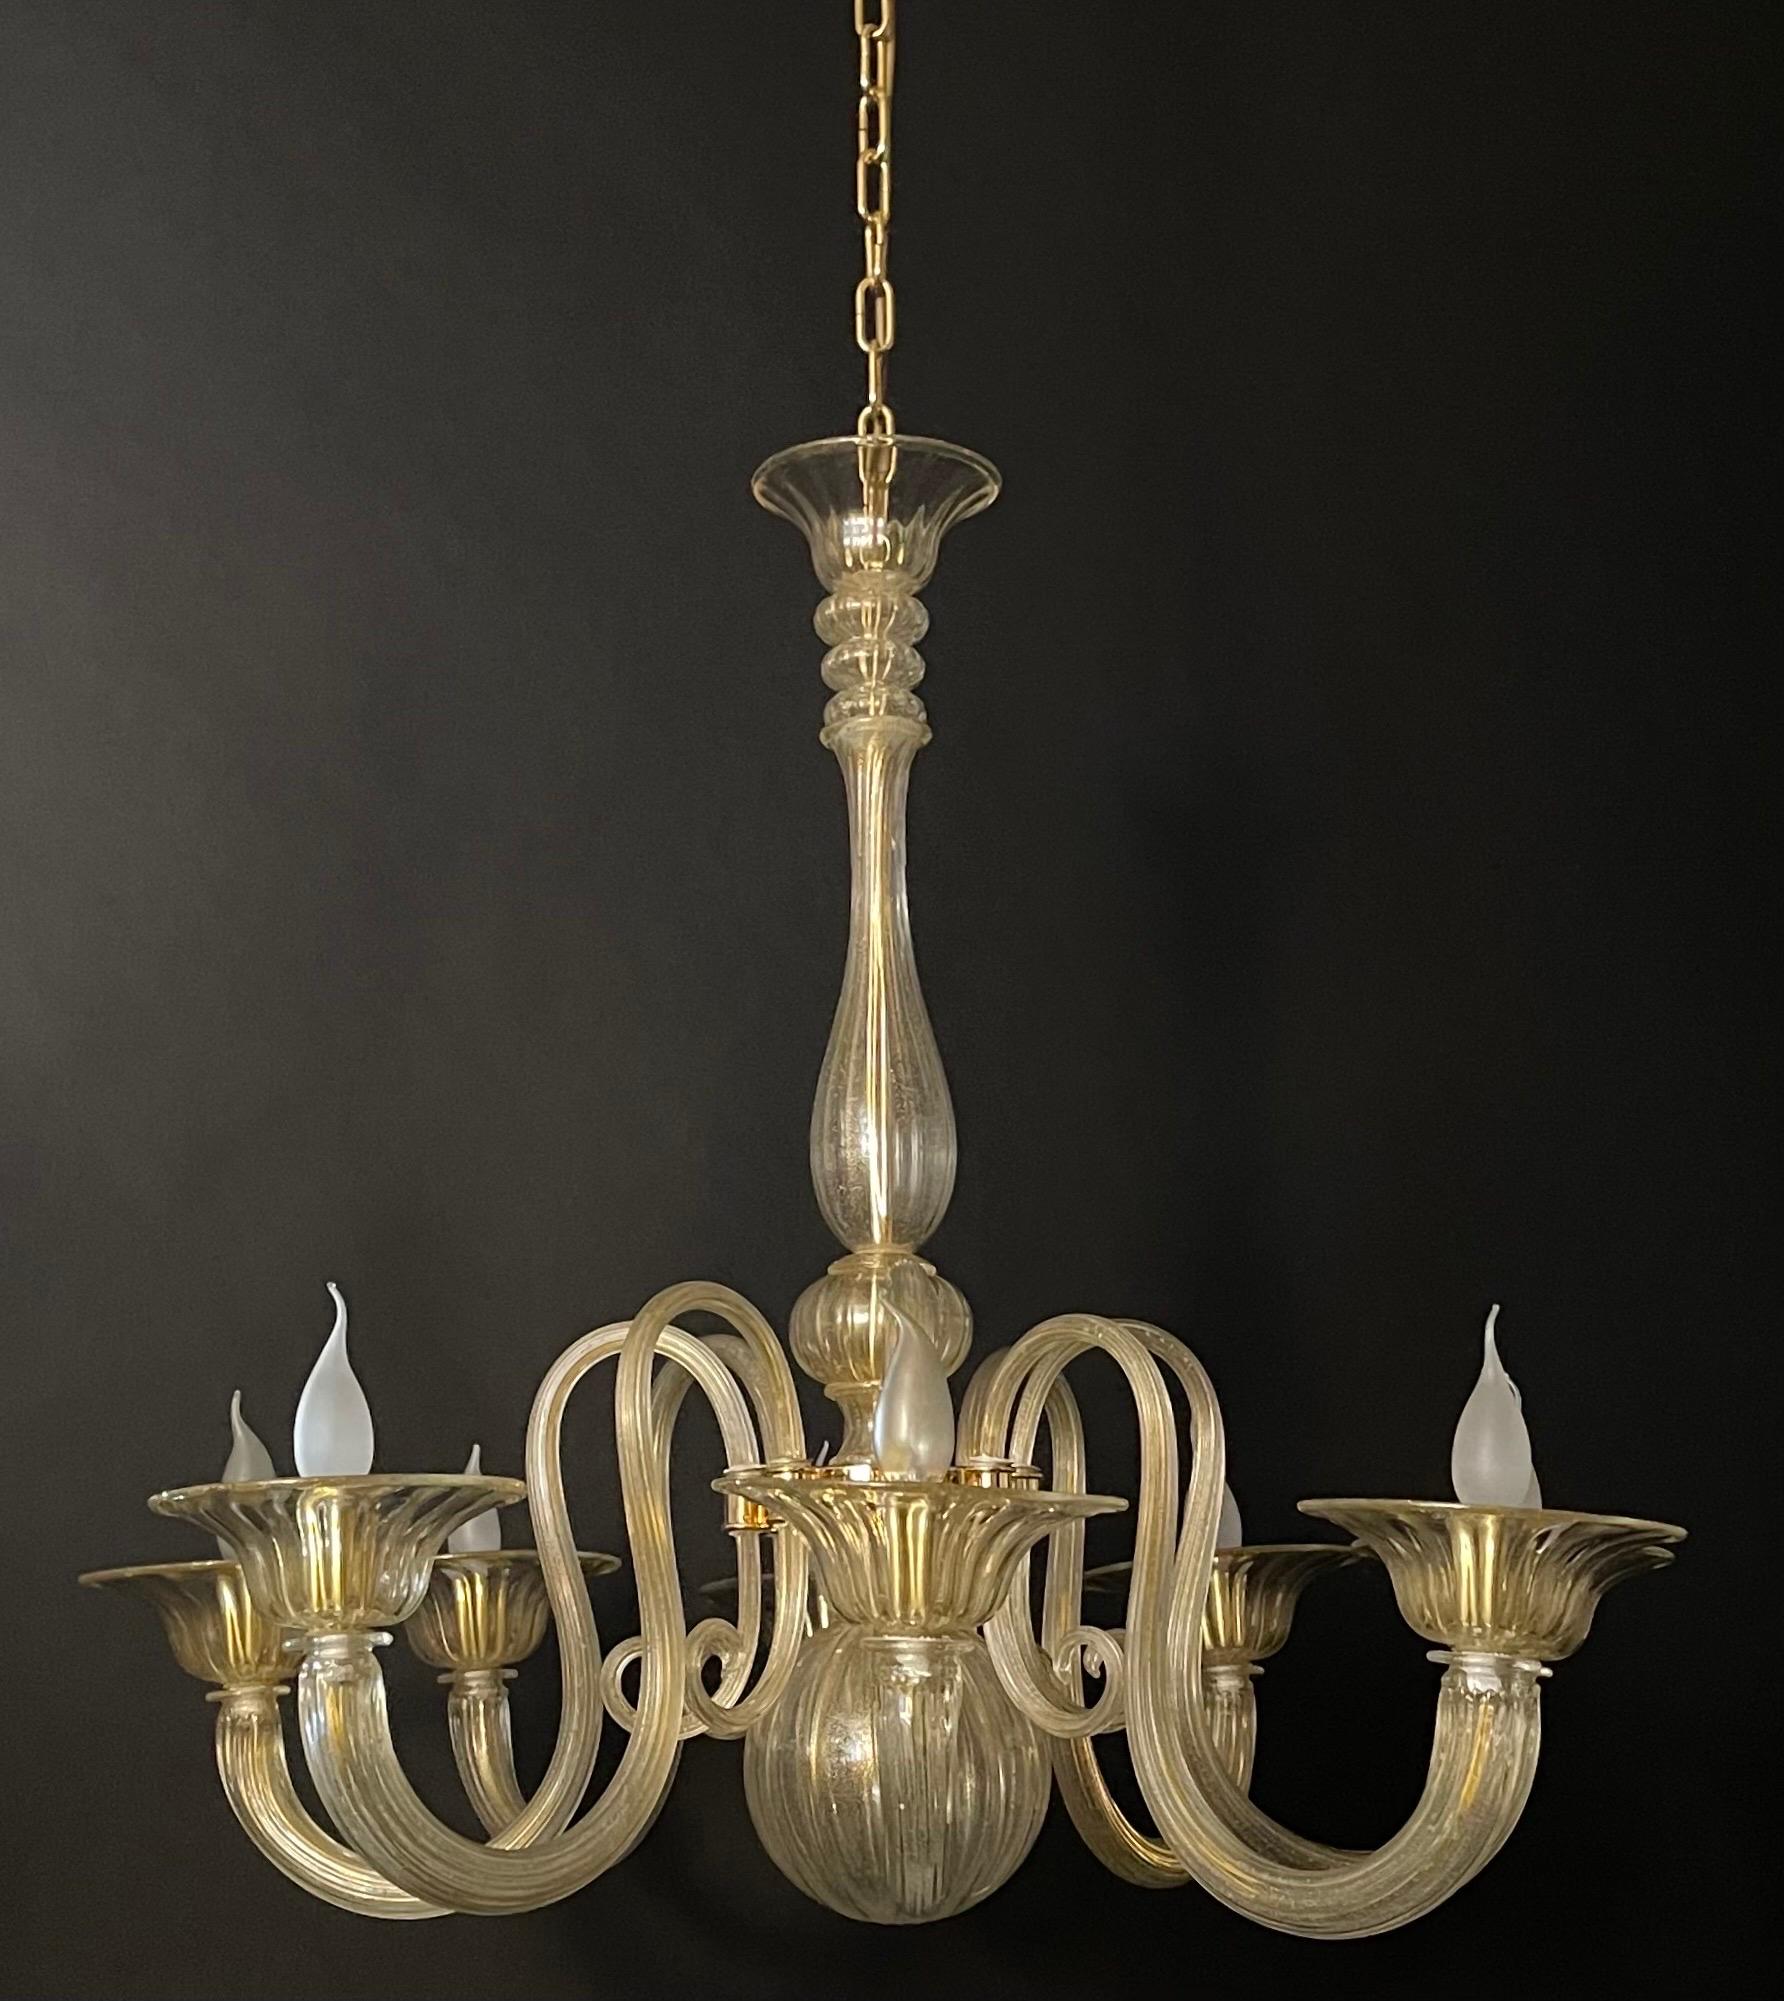 A large gold dusted Murano glass and 24 karat gold - plated brass chandelier by  Barovier Toso, Italy, circa 1960s.
Socket: 8 x e14 for standards screw bulbs.
 